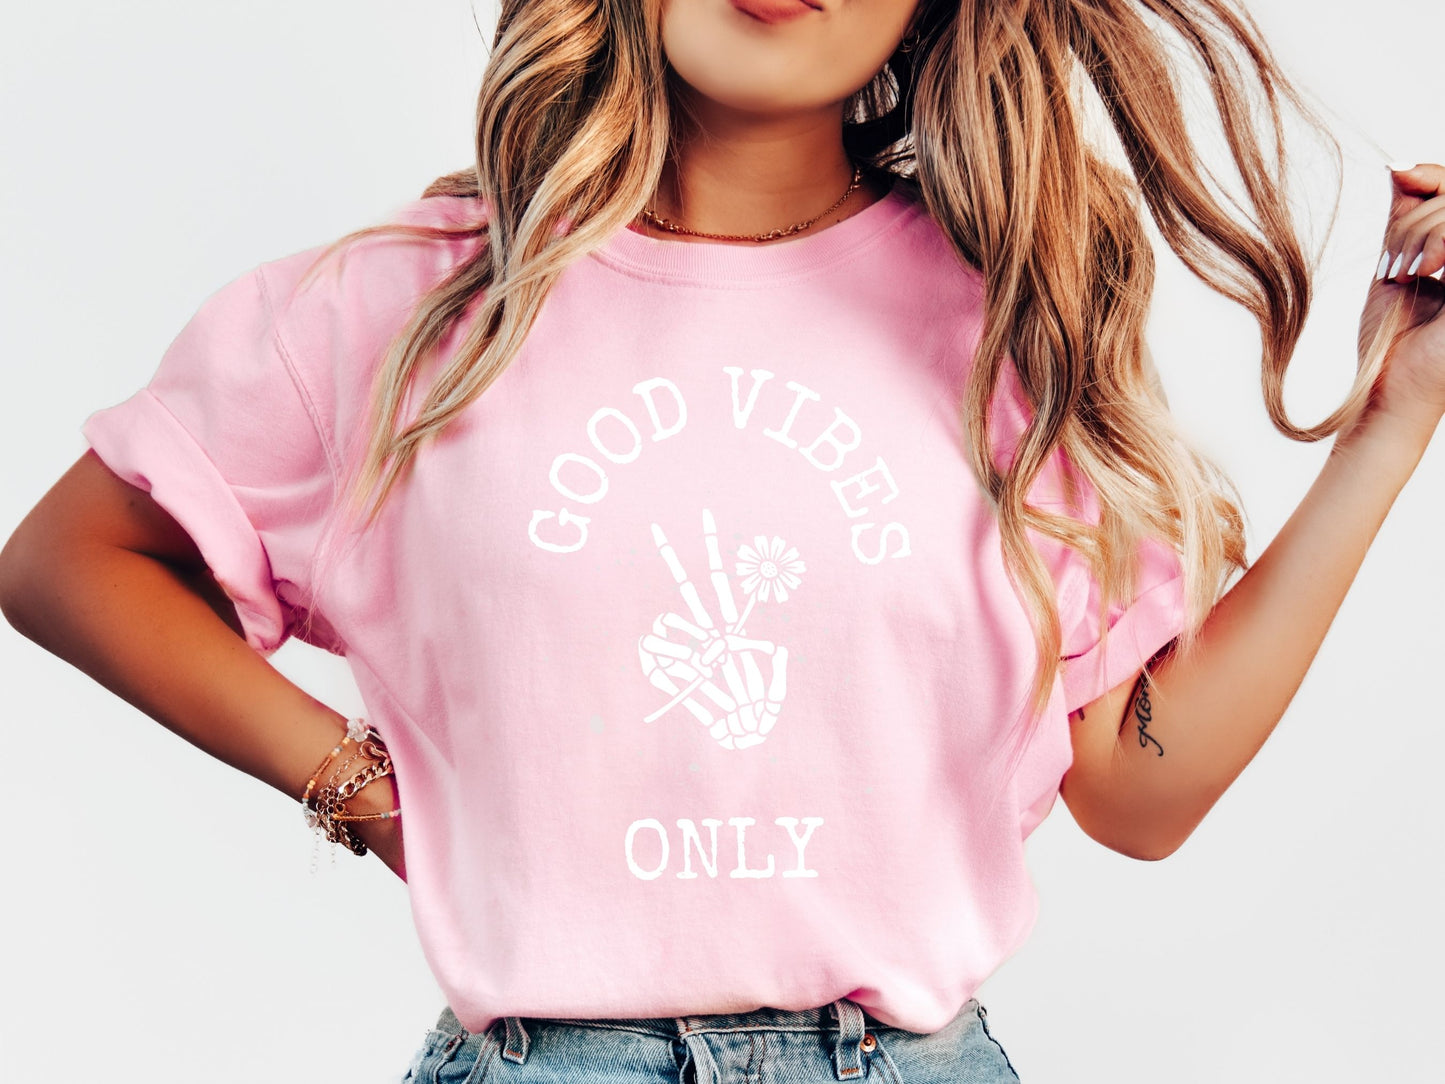 Good Vibes Only T-Shirt - White Writing